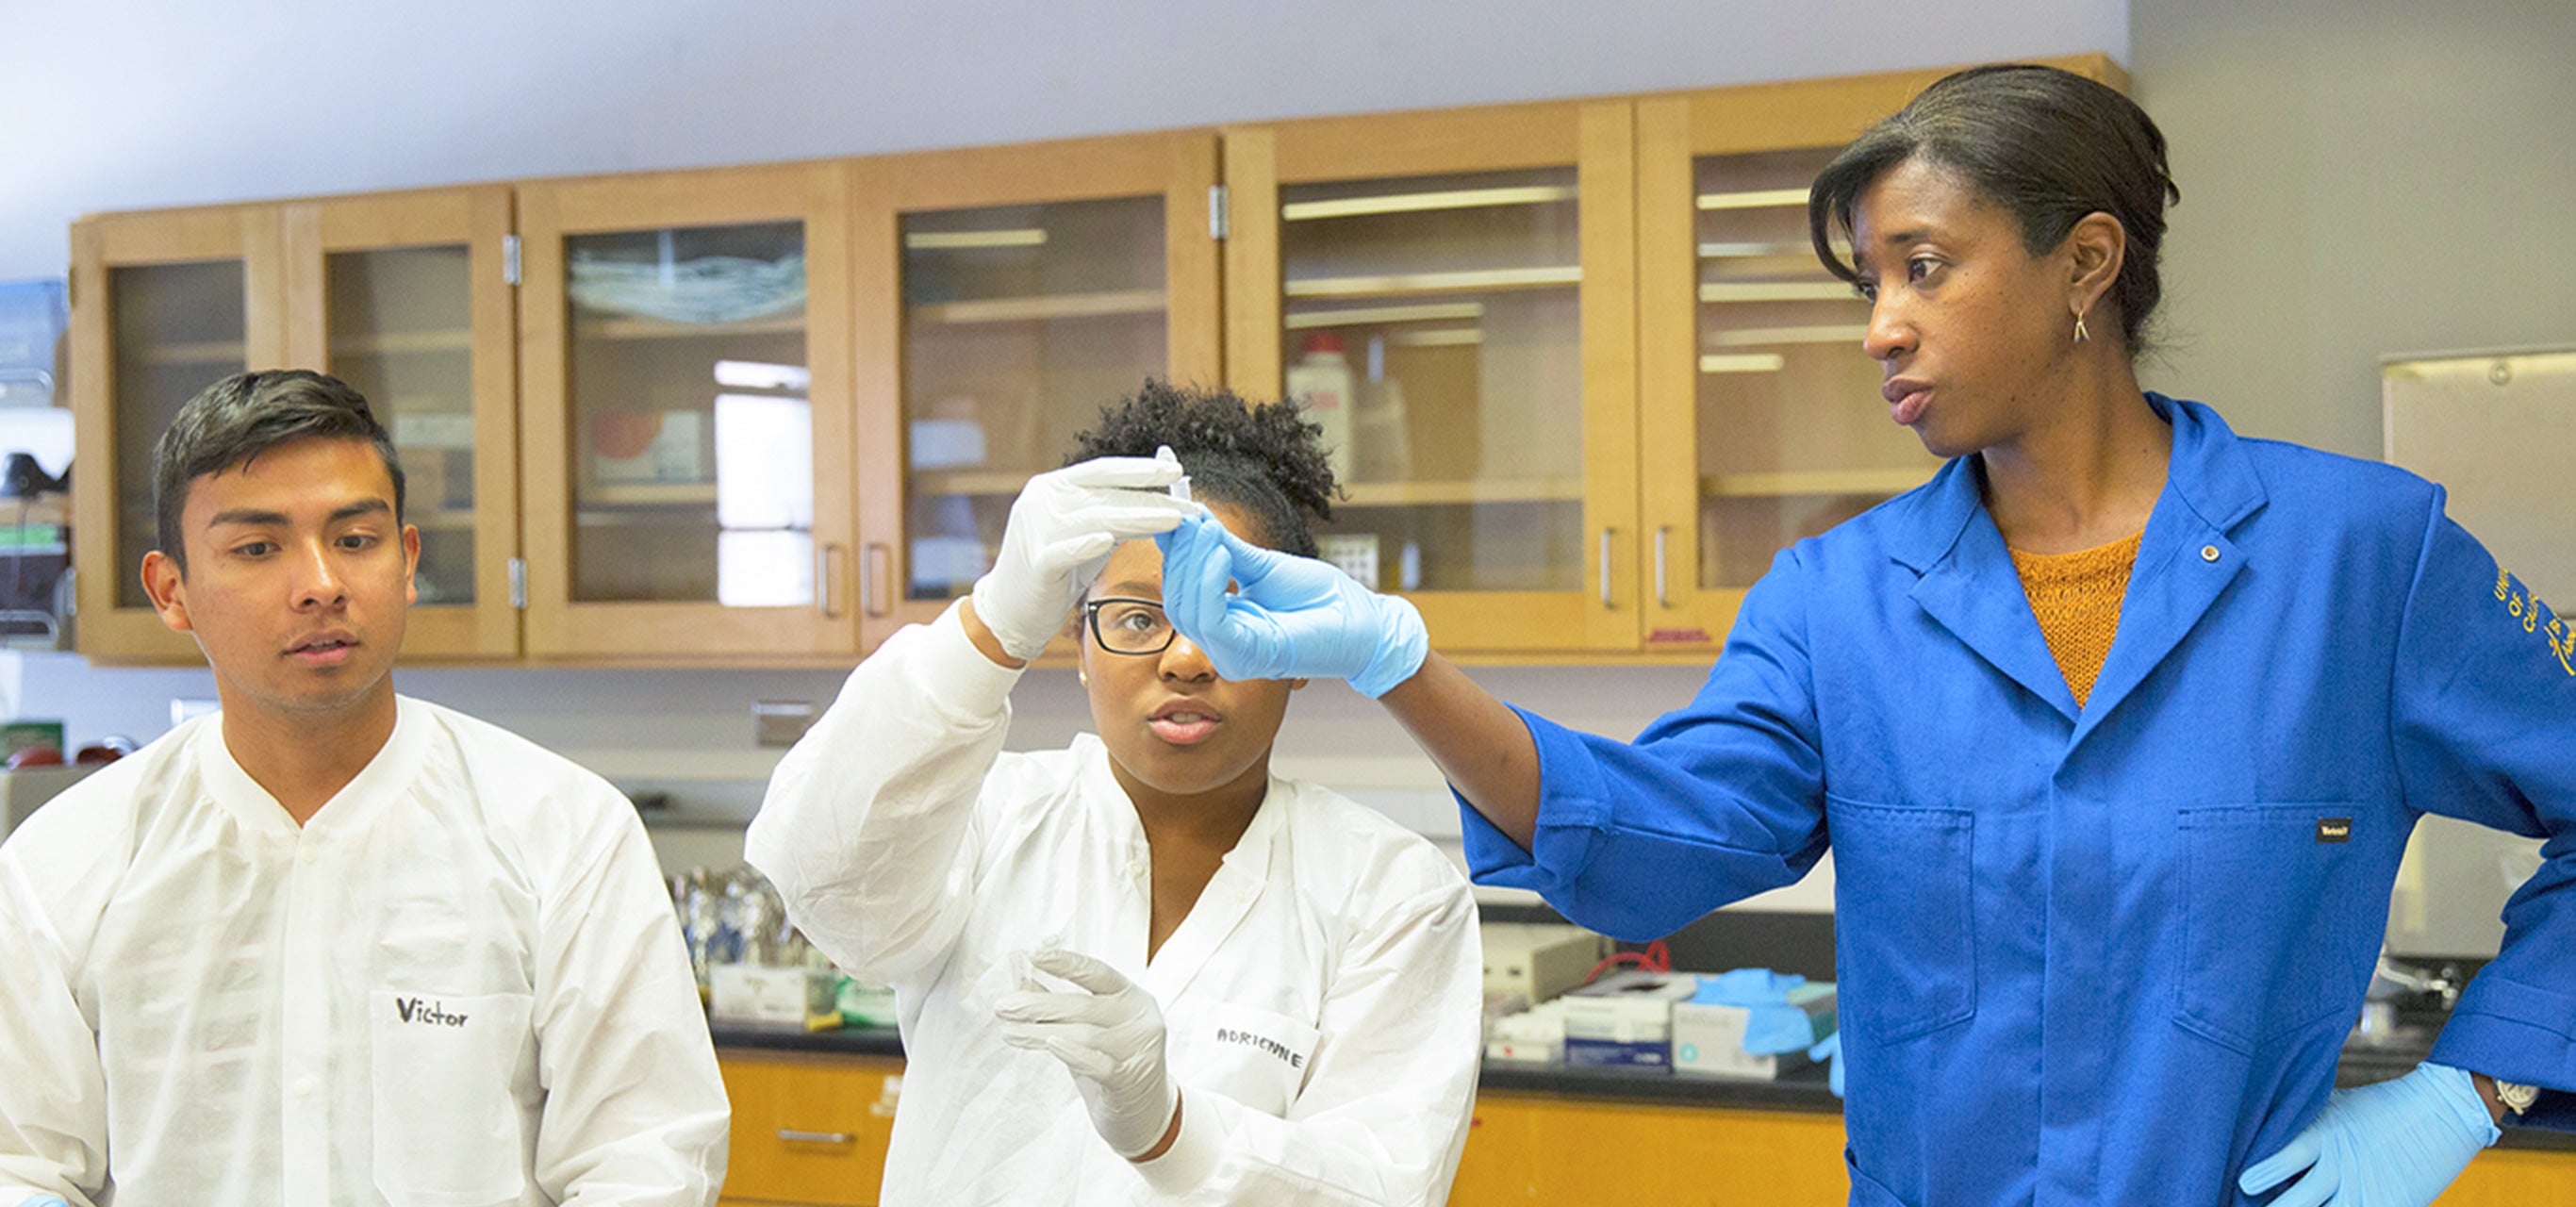 Professor Tracy Johnson works with students in the lab.